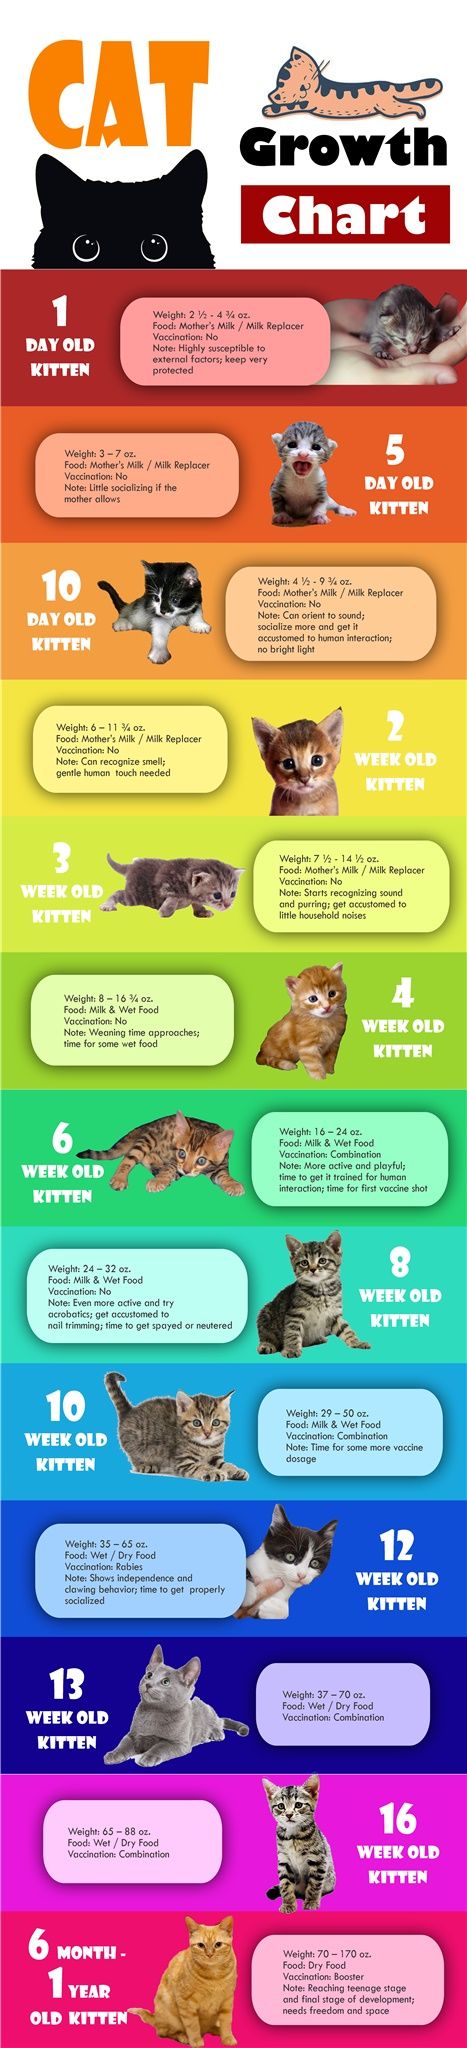 Kitten Cat Growth Chart by Age, Weight and Food